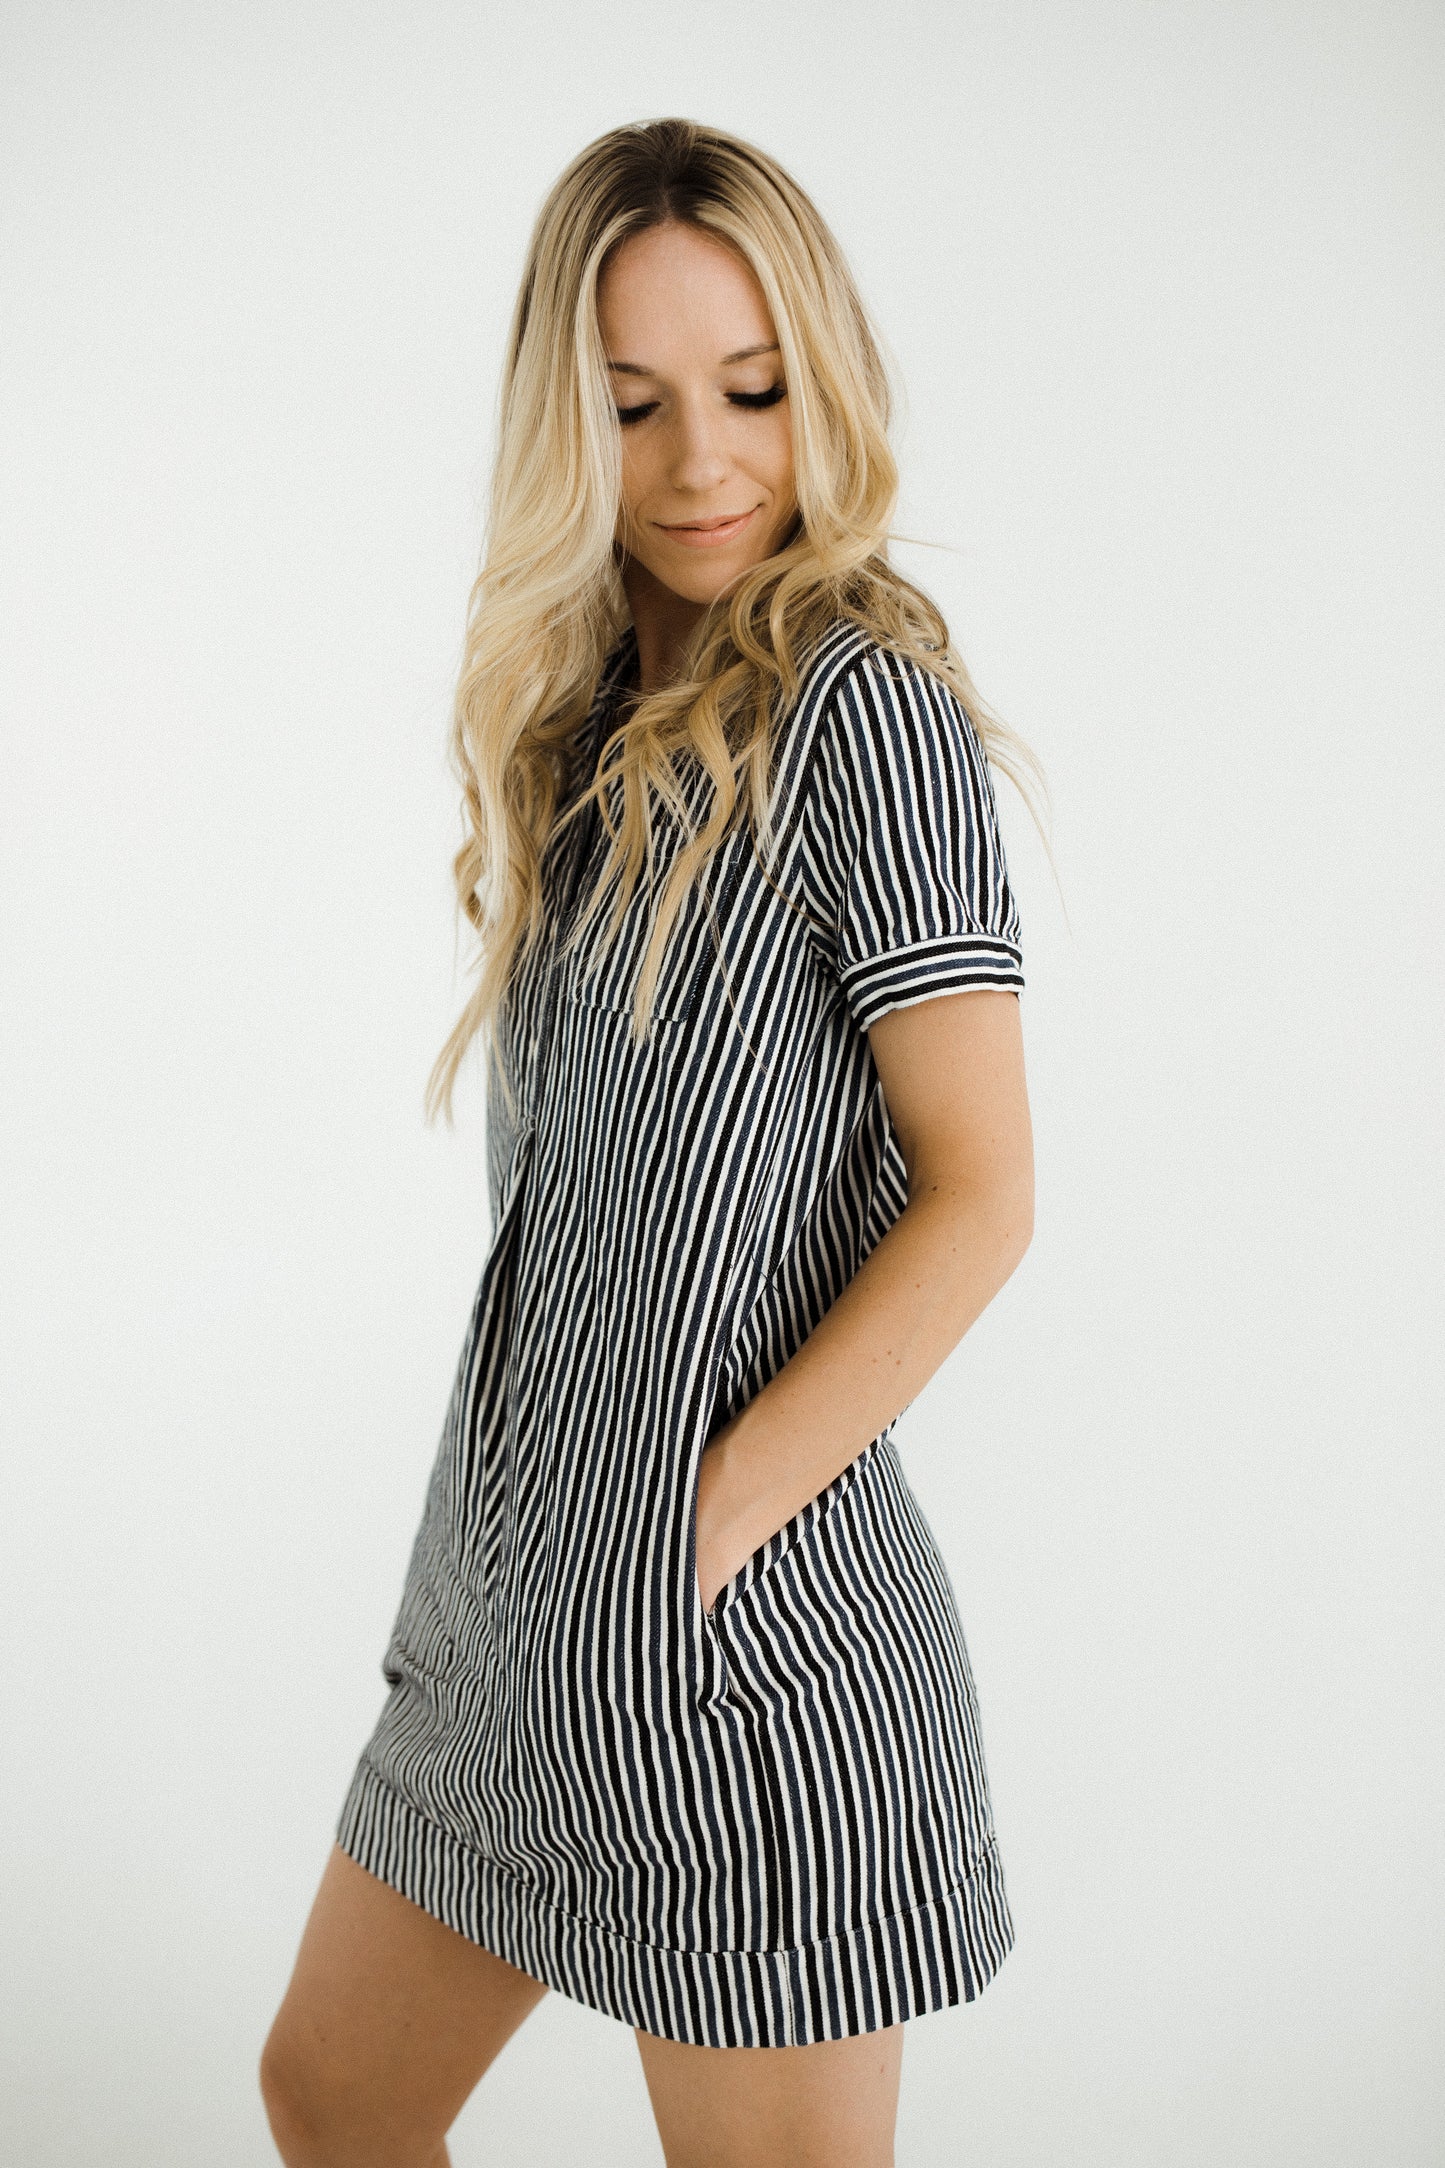 Striped Dress by Anthropologie